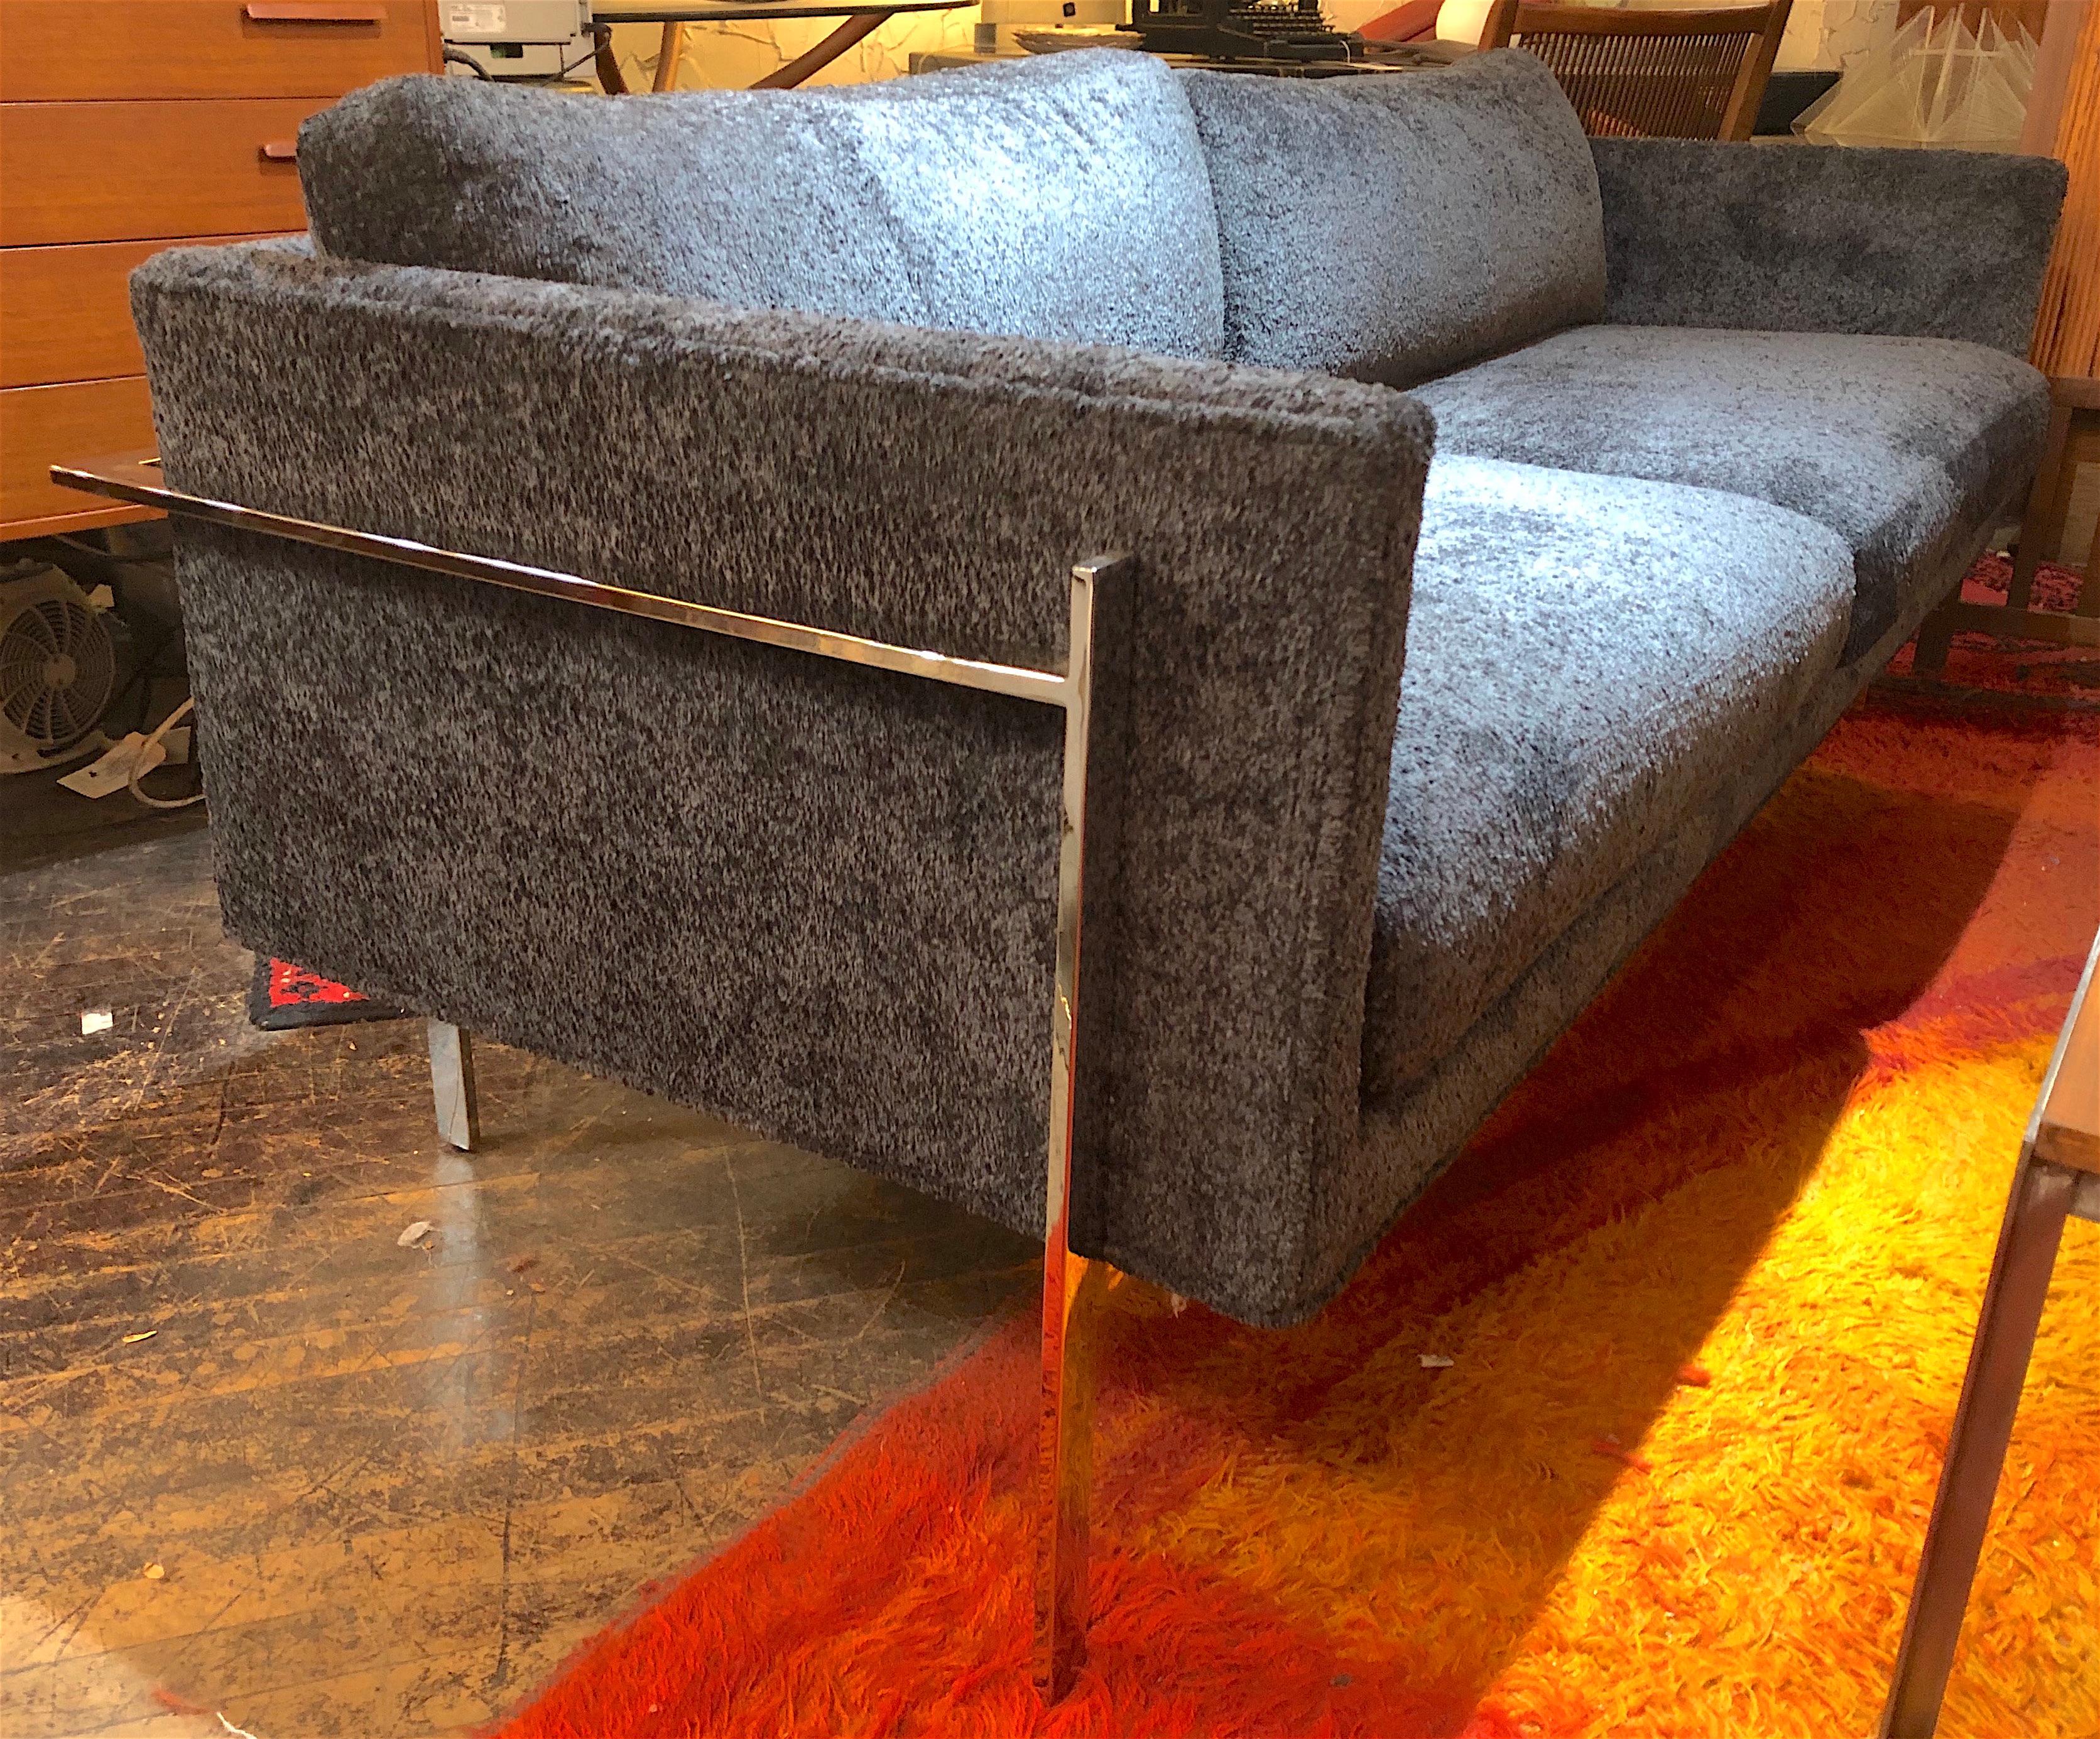 Designed by Milo Baughman in 1968, the Drop In sofa is a timeless, classic modern sofa, with striking good looks from every angle. Polished steel bar running around the sofa and down the legs. Covered in a shag deep blue fabric.
Please confirm